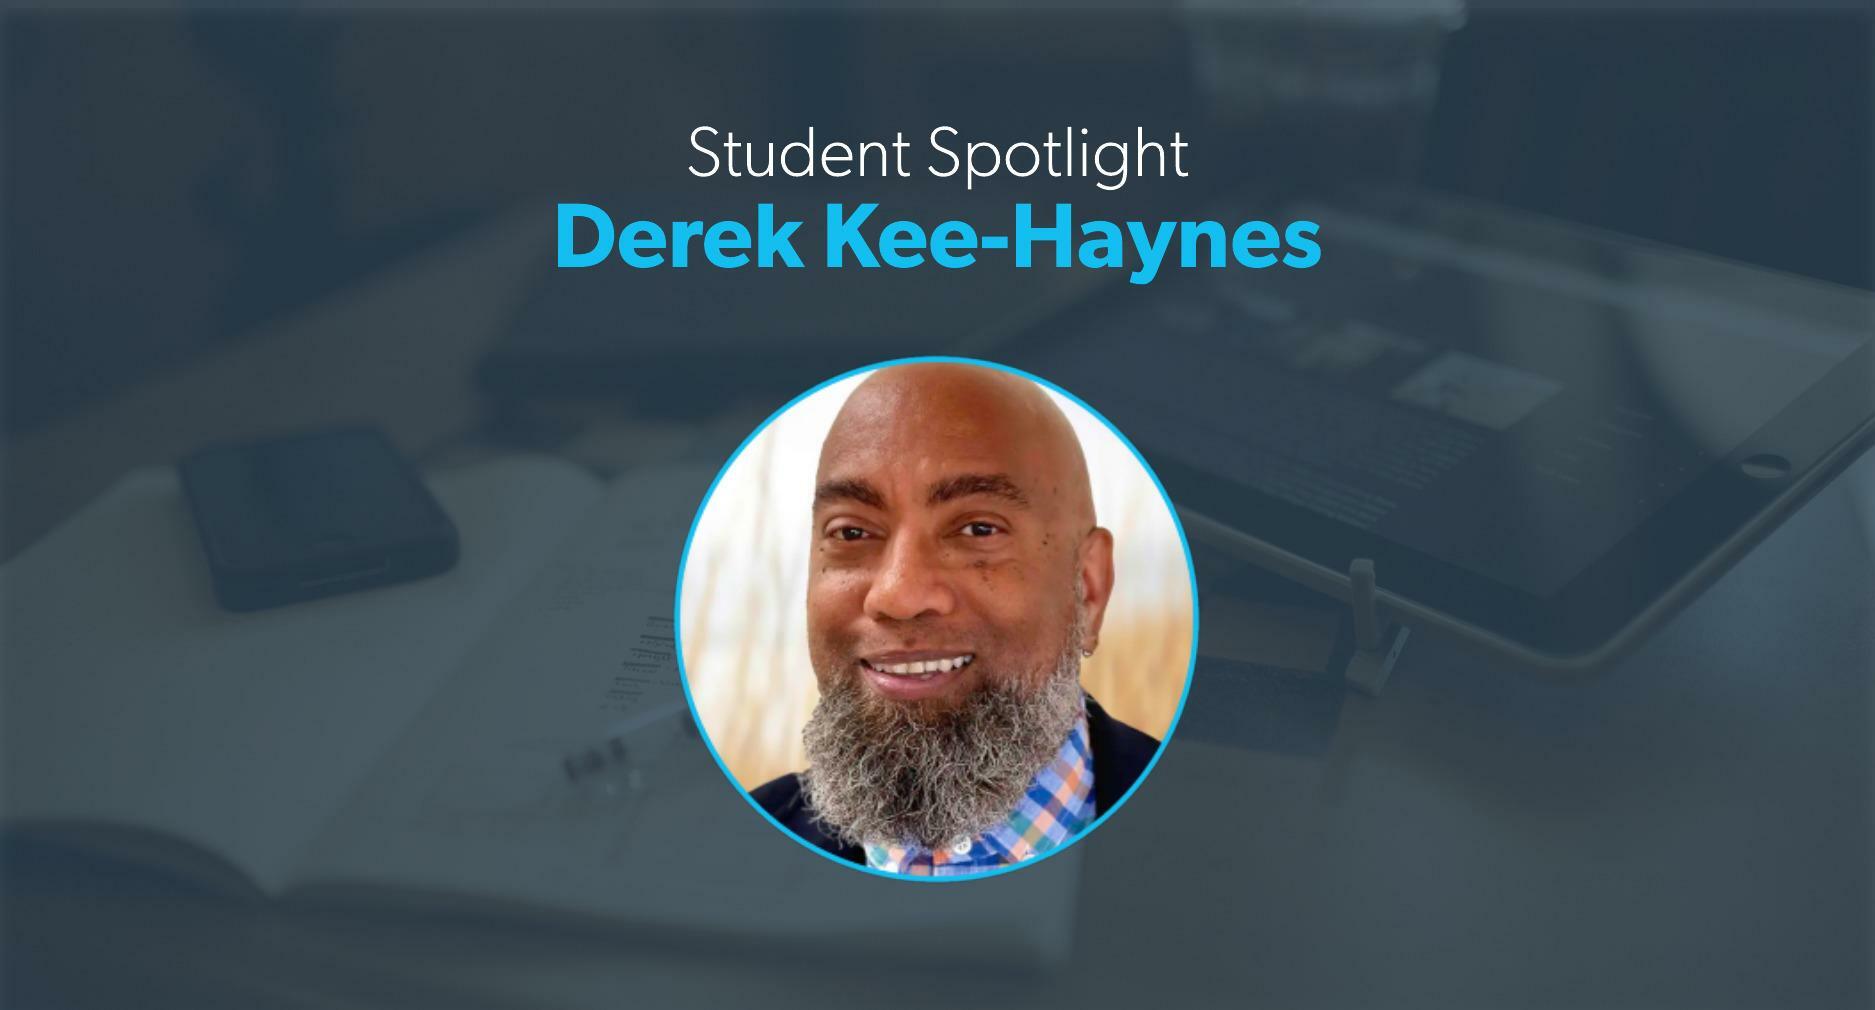 Derek Kee-Haynes smiles in a profile photo inset on a banner image under text displaying his name.